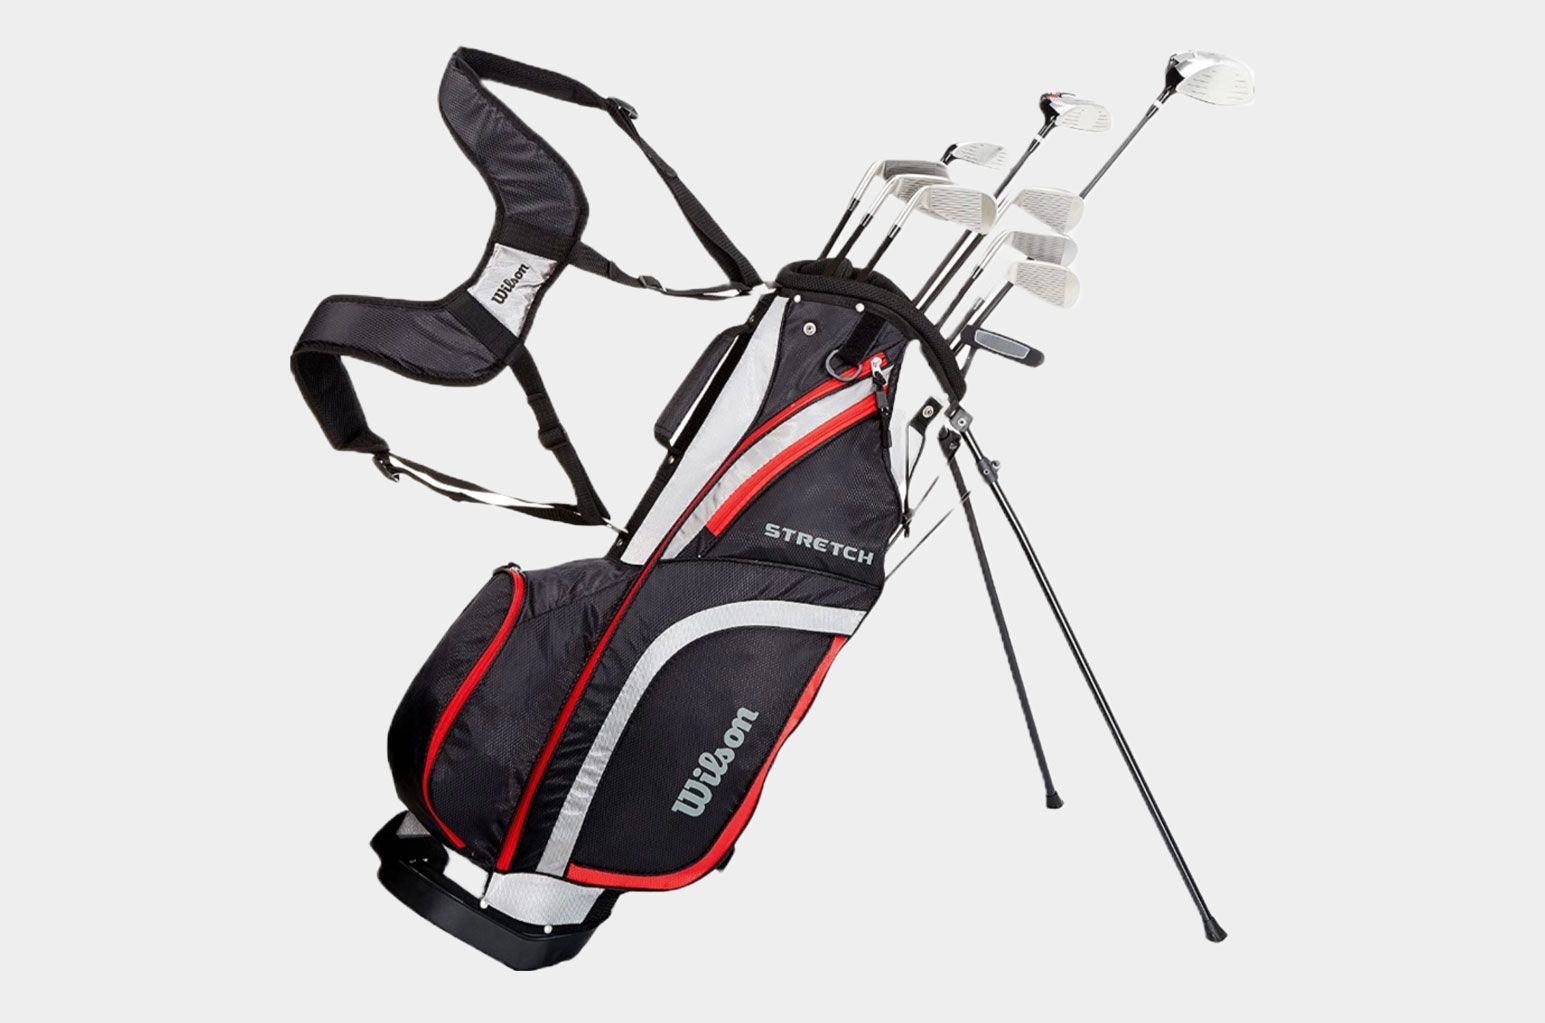 Wilson Stretch 10-Club Set product image of a complete set of clubs in a black, white, and red golf bag featuring a stand.